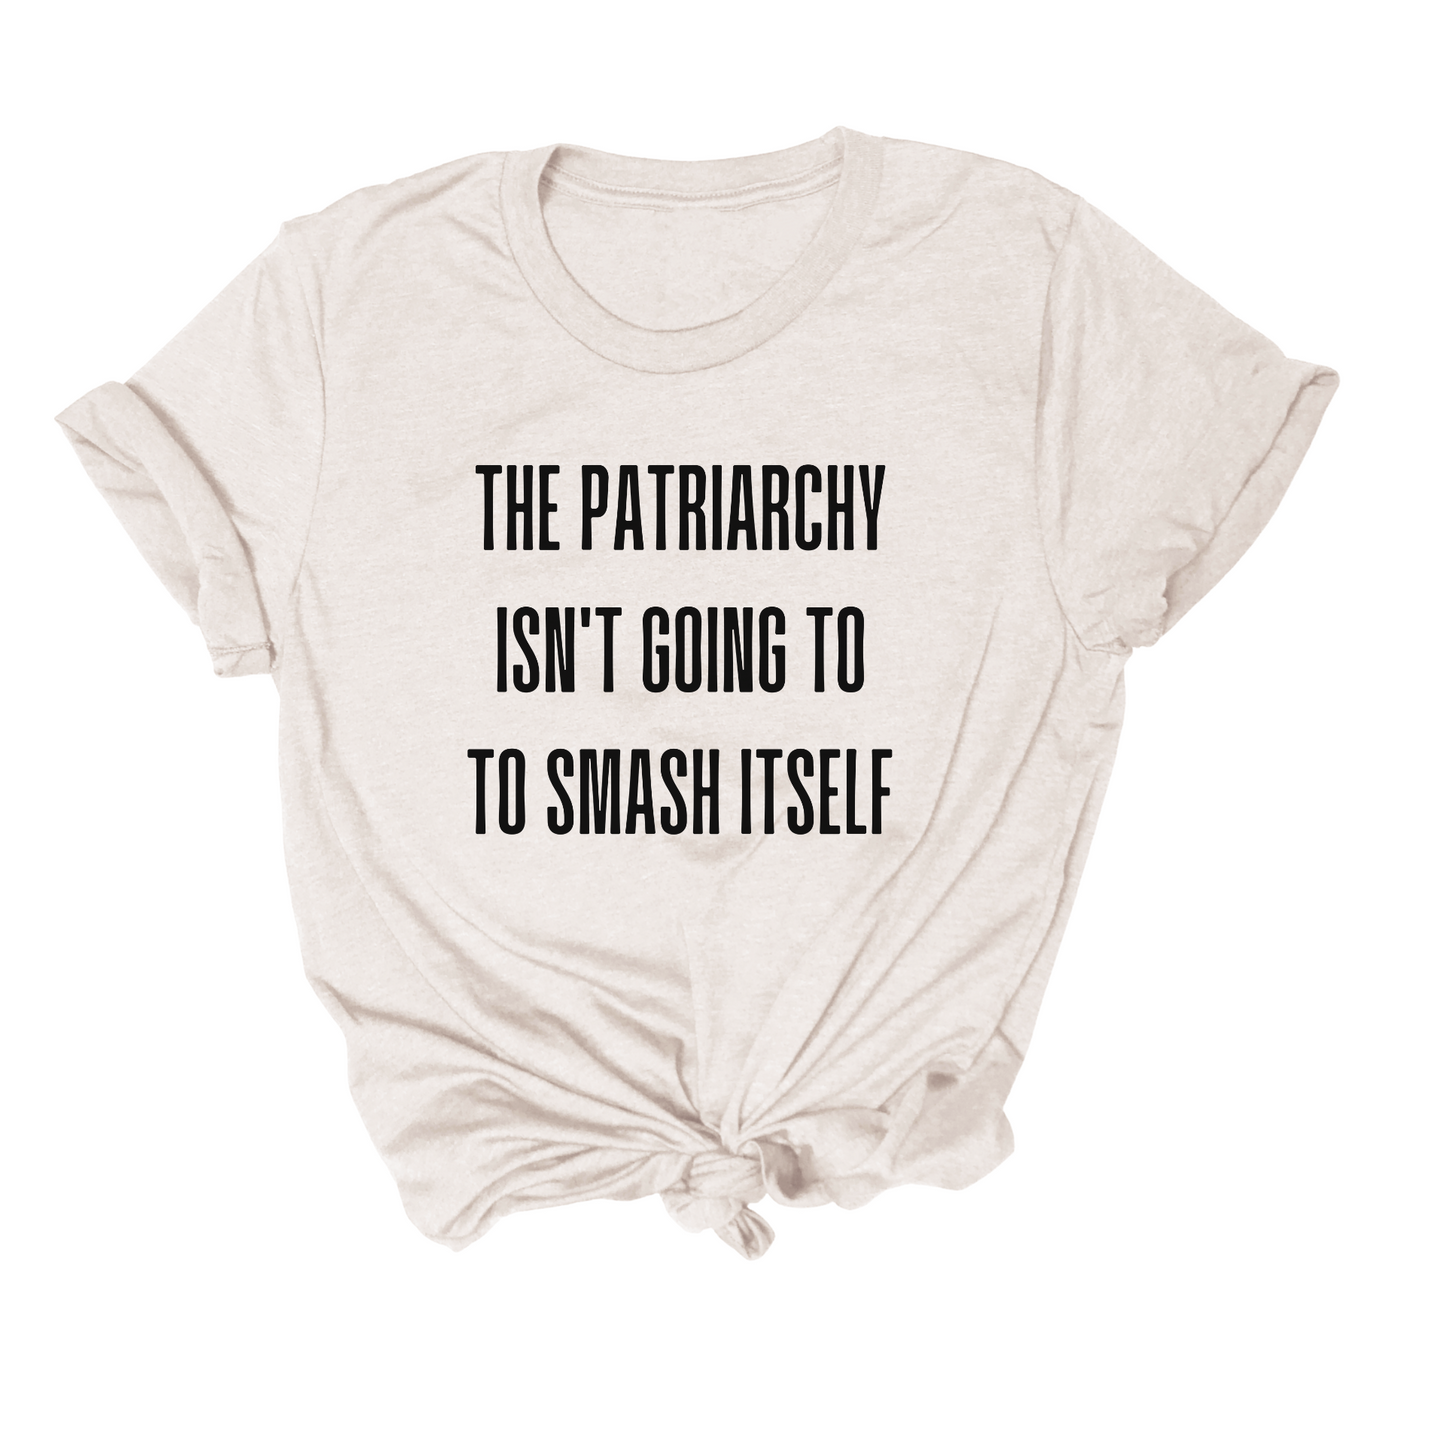 The Patriarchy Isn't Going To Smash Itself Tee